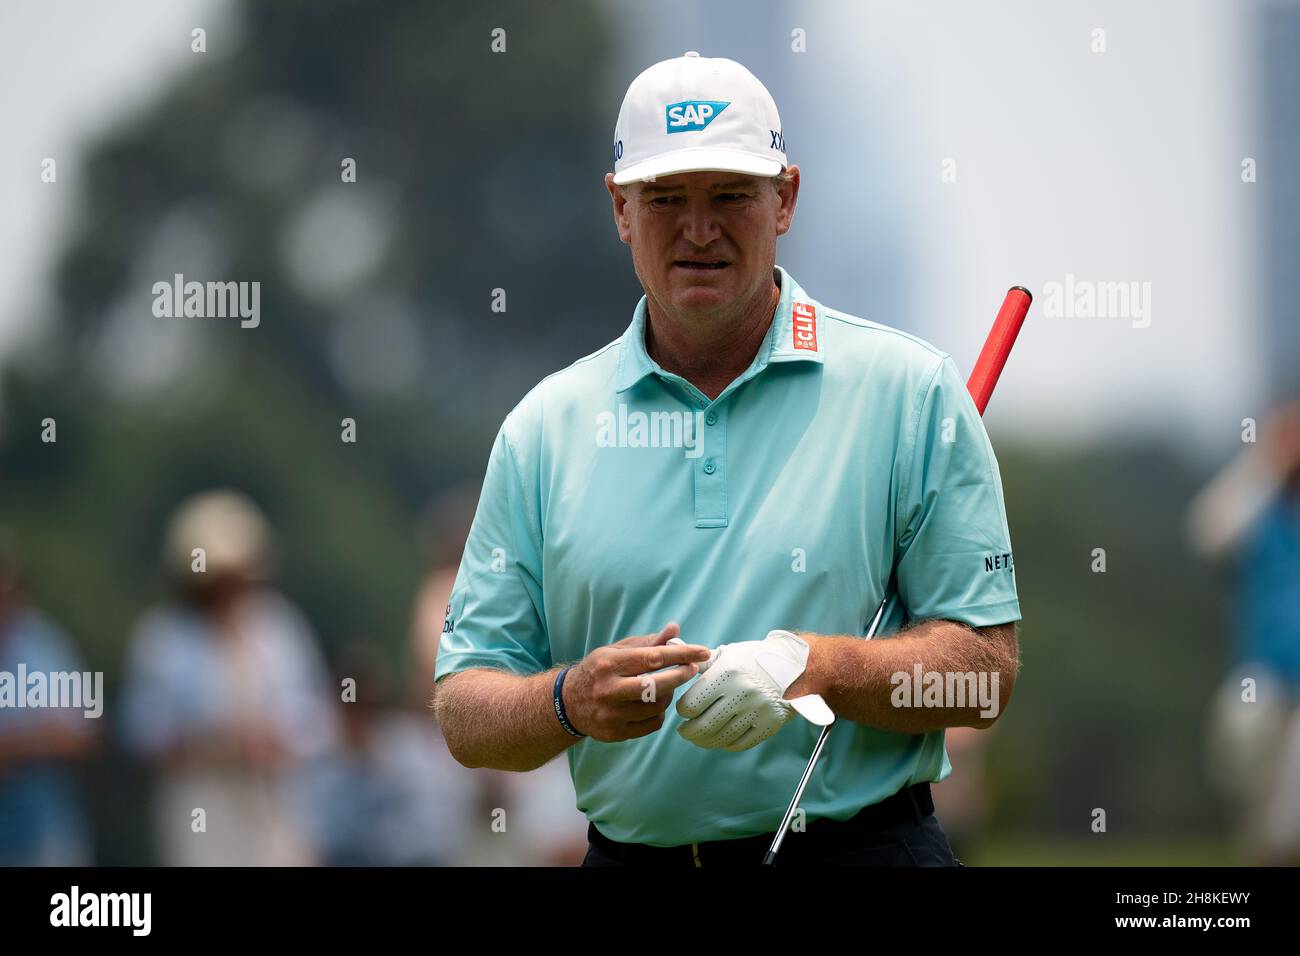 Ernie Els during round 1 of The Australian Open Golf at The Australian Golf Club on December 05, 2019 in Sydney, Australia. Credit: Speed Media/Alamy Live News Stock Photo